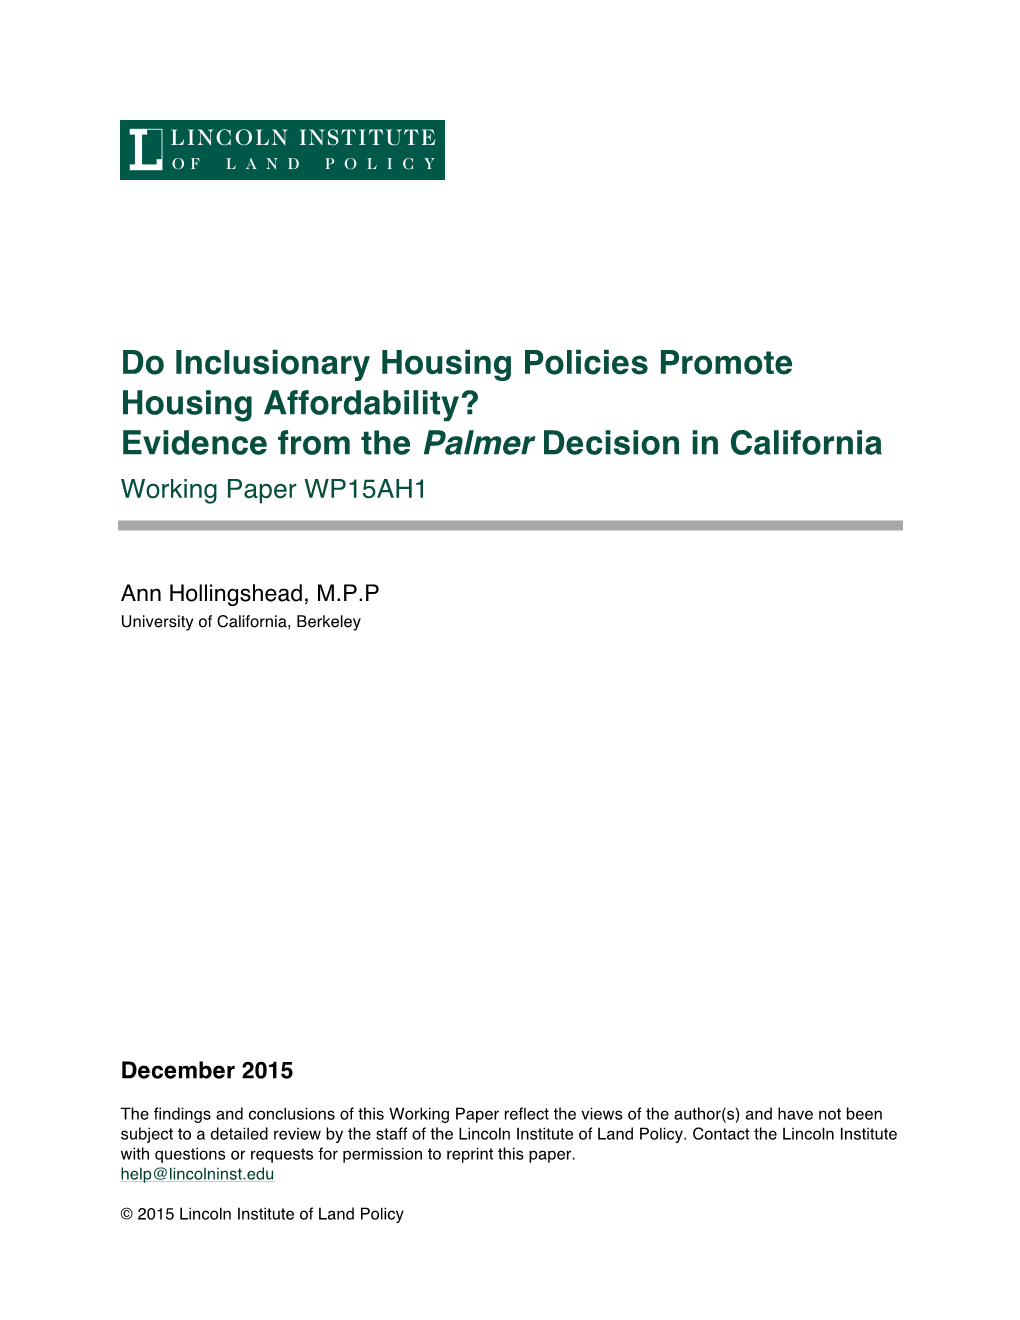 Do Inclusionary Housing Policies Promote Housing Affordability? Evidence from the Palmer Decision in California Working Paper WP15AH1